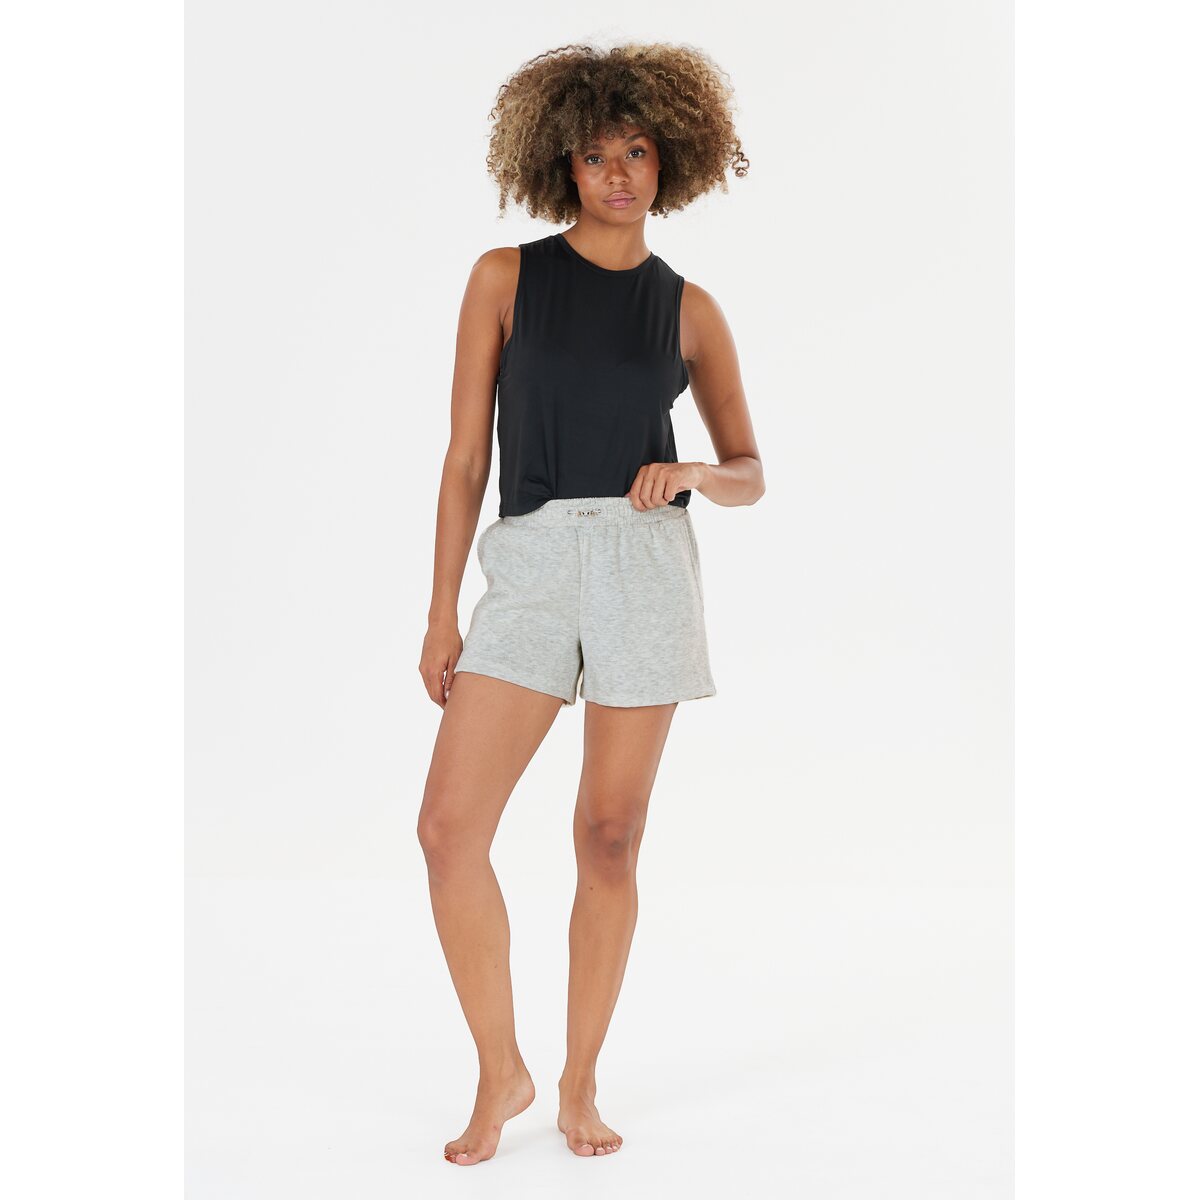 Athlecia Ruthie Womenswear Shorts 4 Shaws Department Stores